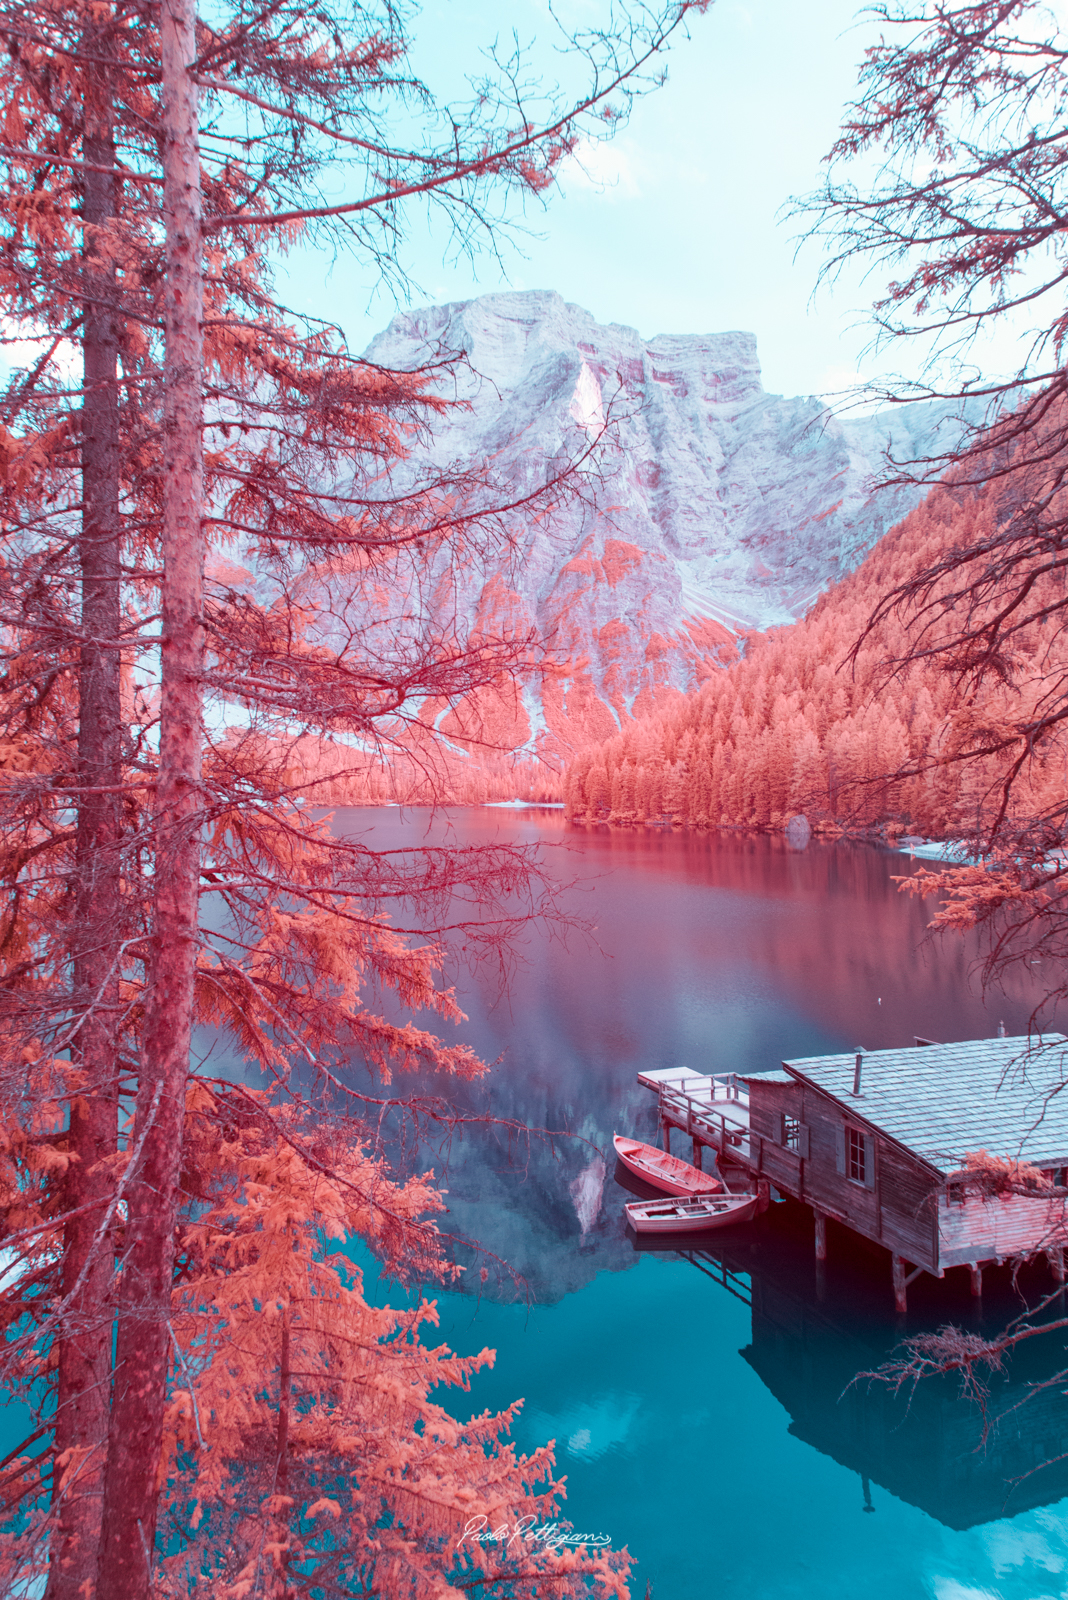 Infrared Landscape Wallpapers - Wallpaper Cave